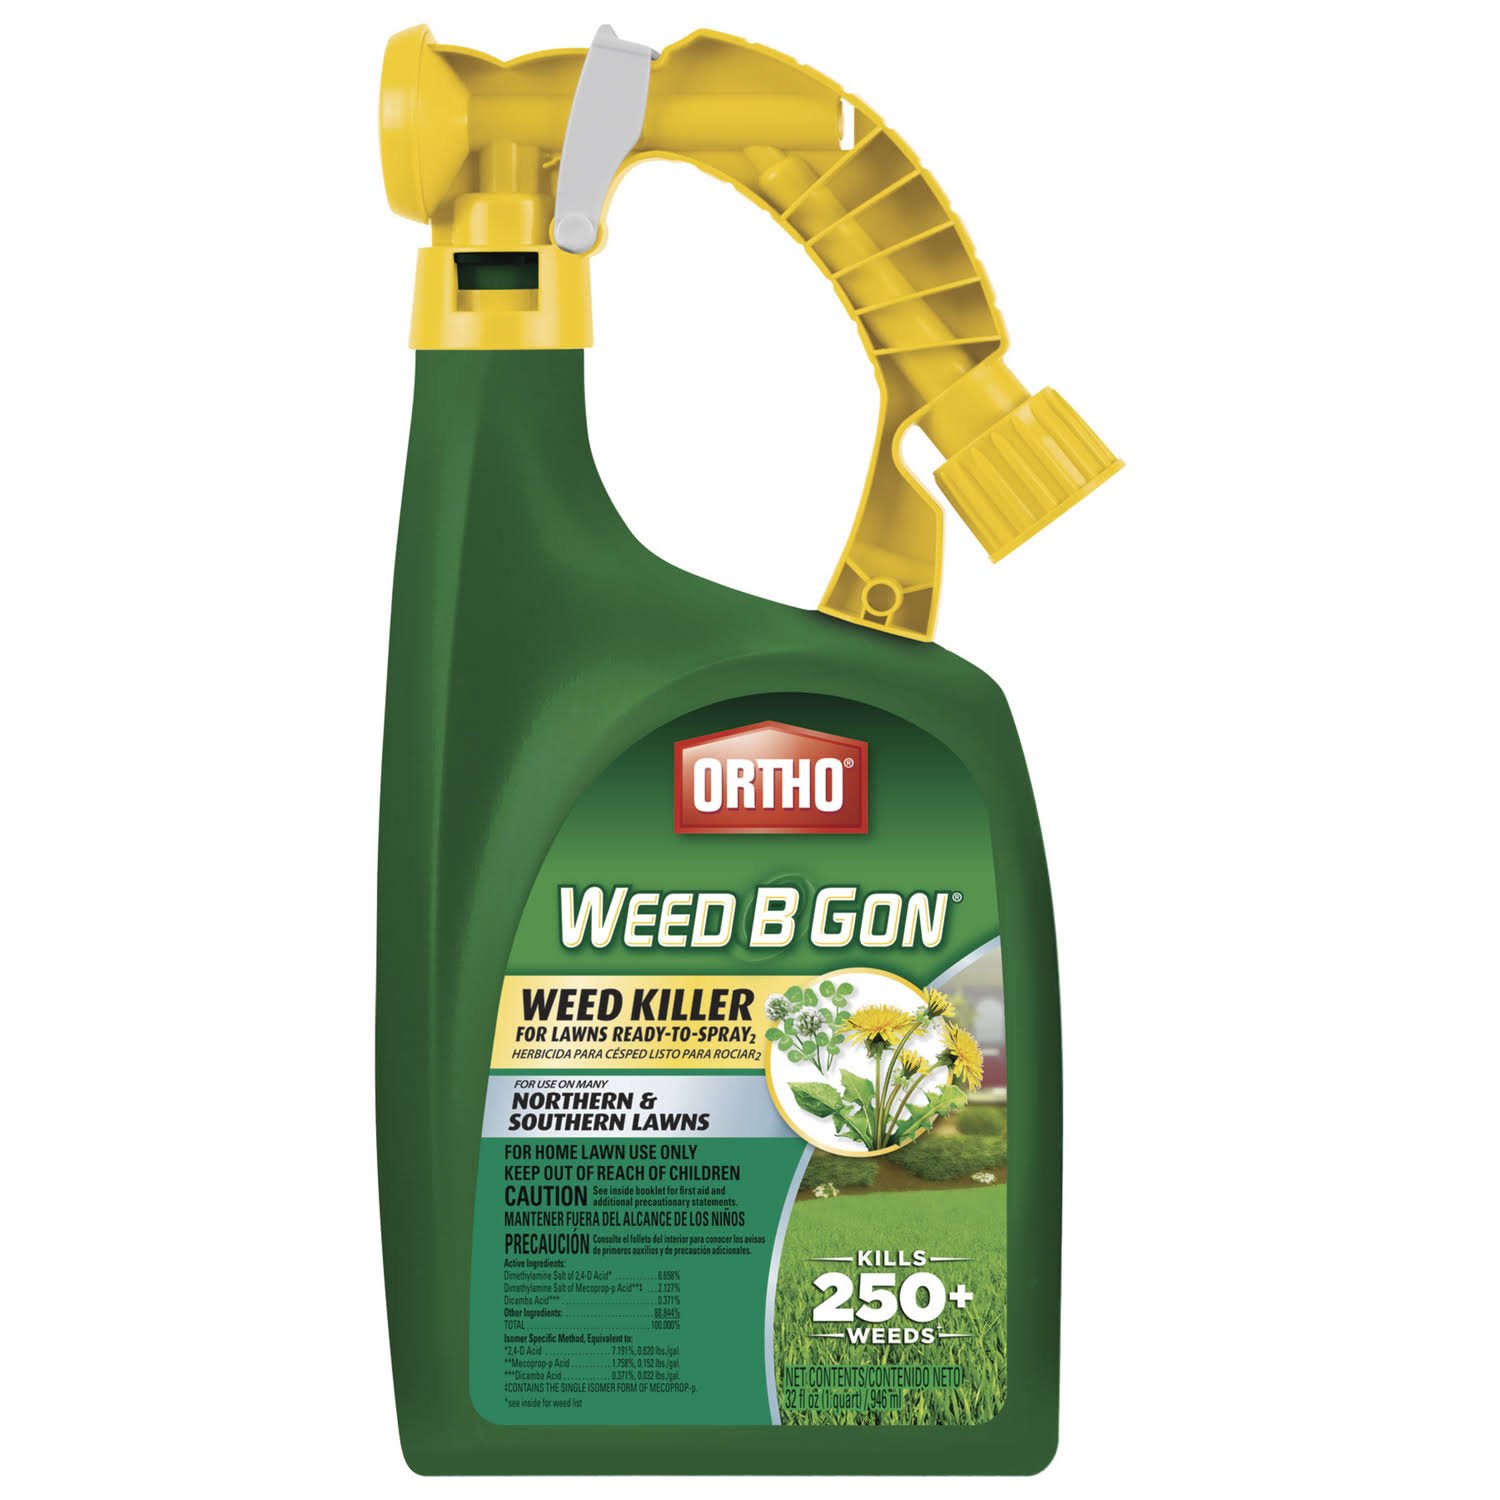 Ortho Weed B Gon Ready-to-Spray Weed Killer - 32oz